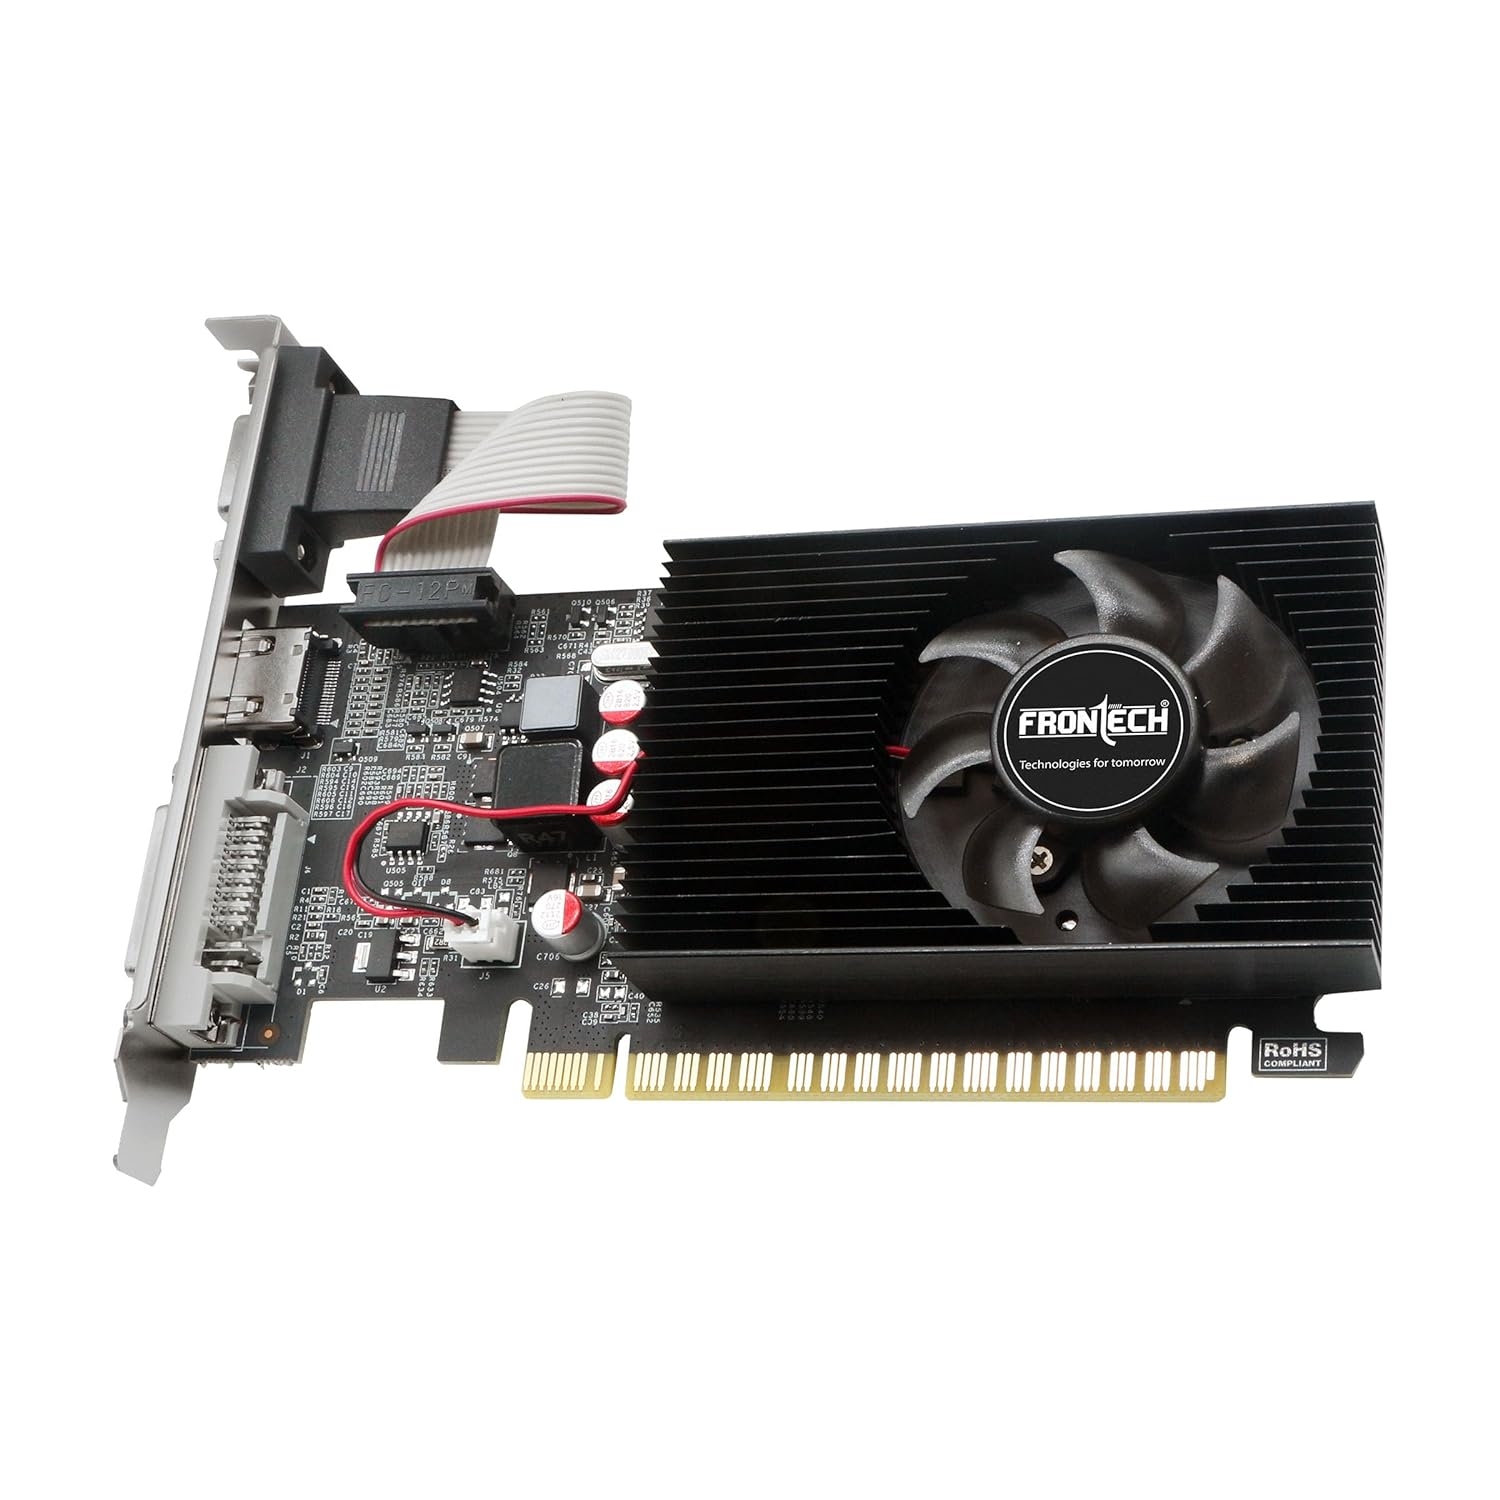 FRONTECH GT730-4GD3 Graphics Card | 4 GB DDR3 64 BIts PCI Express RAM, Gaming Graphics Card (GRP-0002)